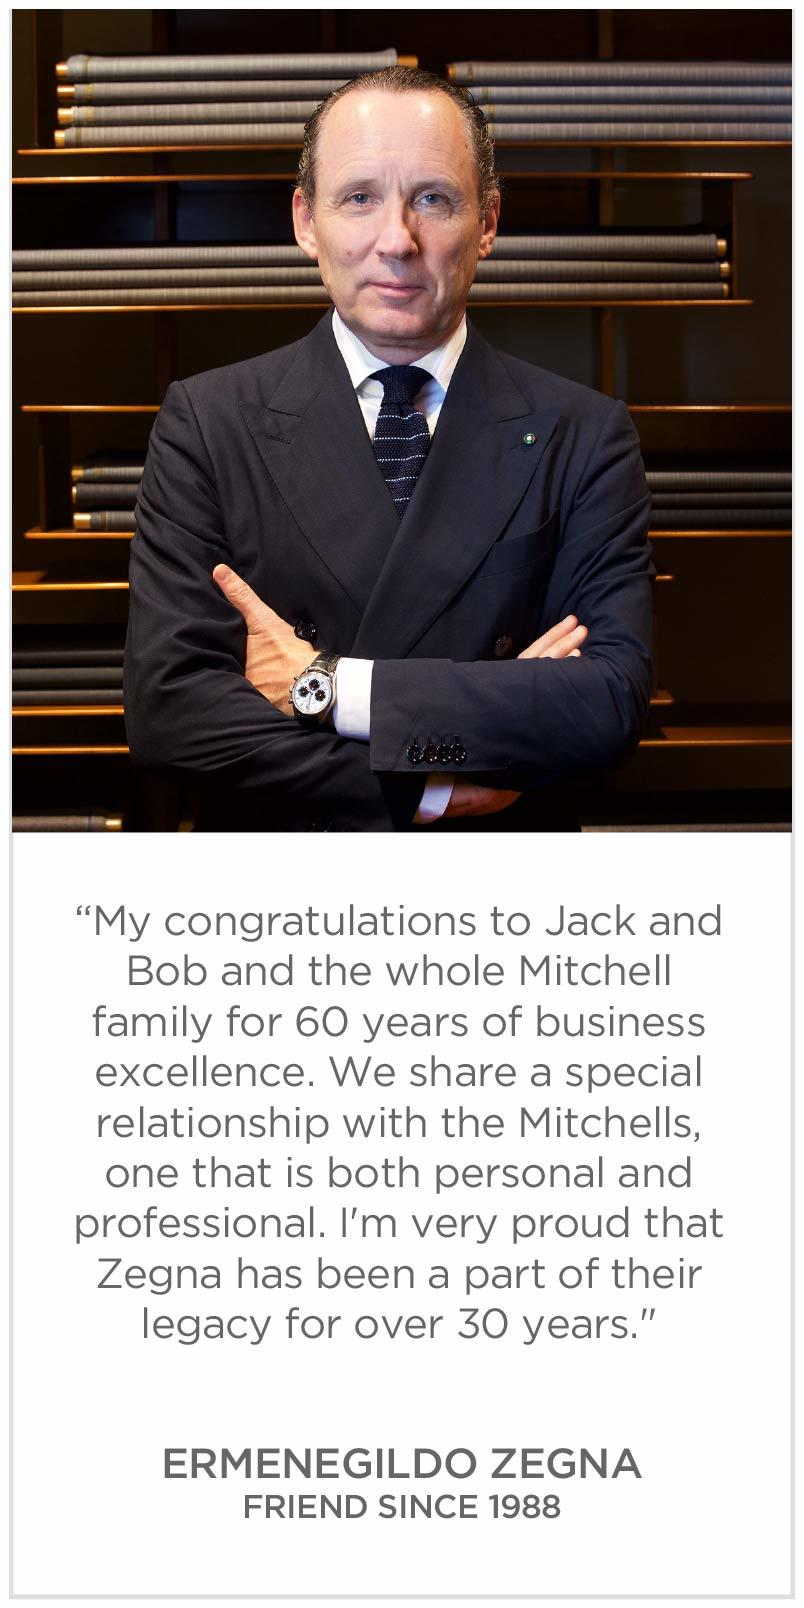 My congratulations to Jack and Bob and the whole Mitchell family for 60 years of business excellence. We share a special relationship with the Mitchells, one that is both personal and professional. Ermenegildo Zegna